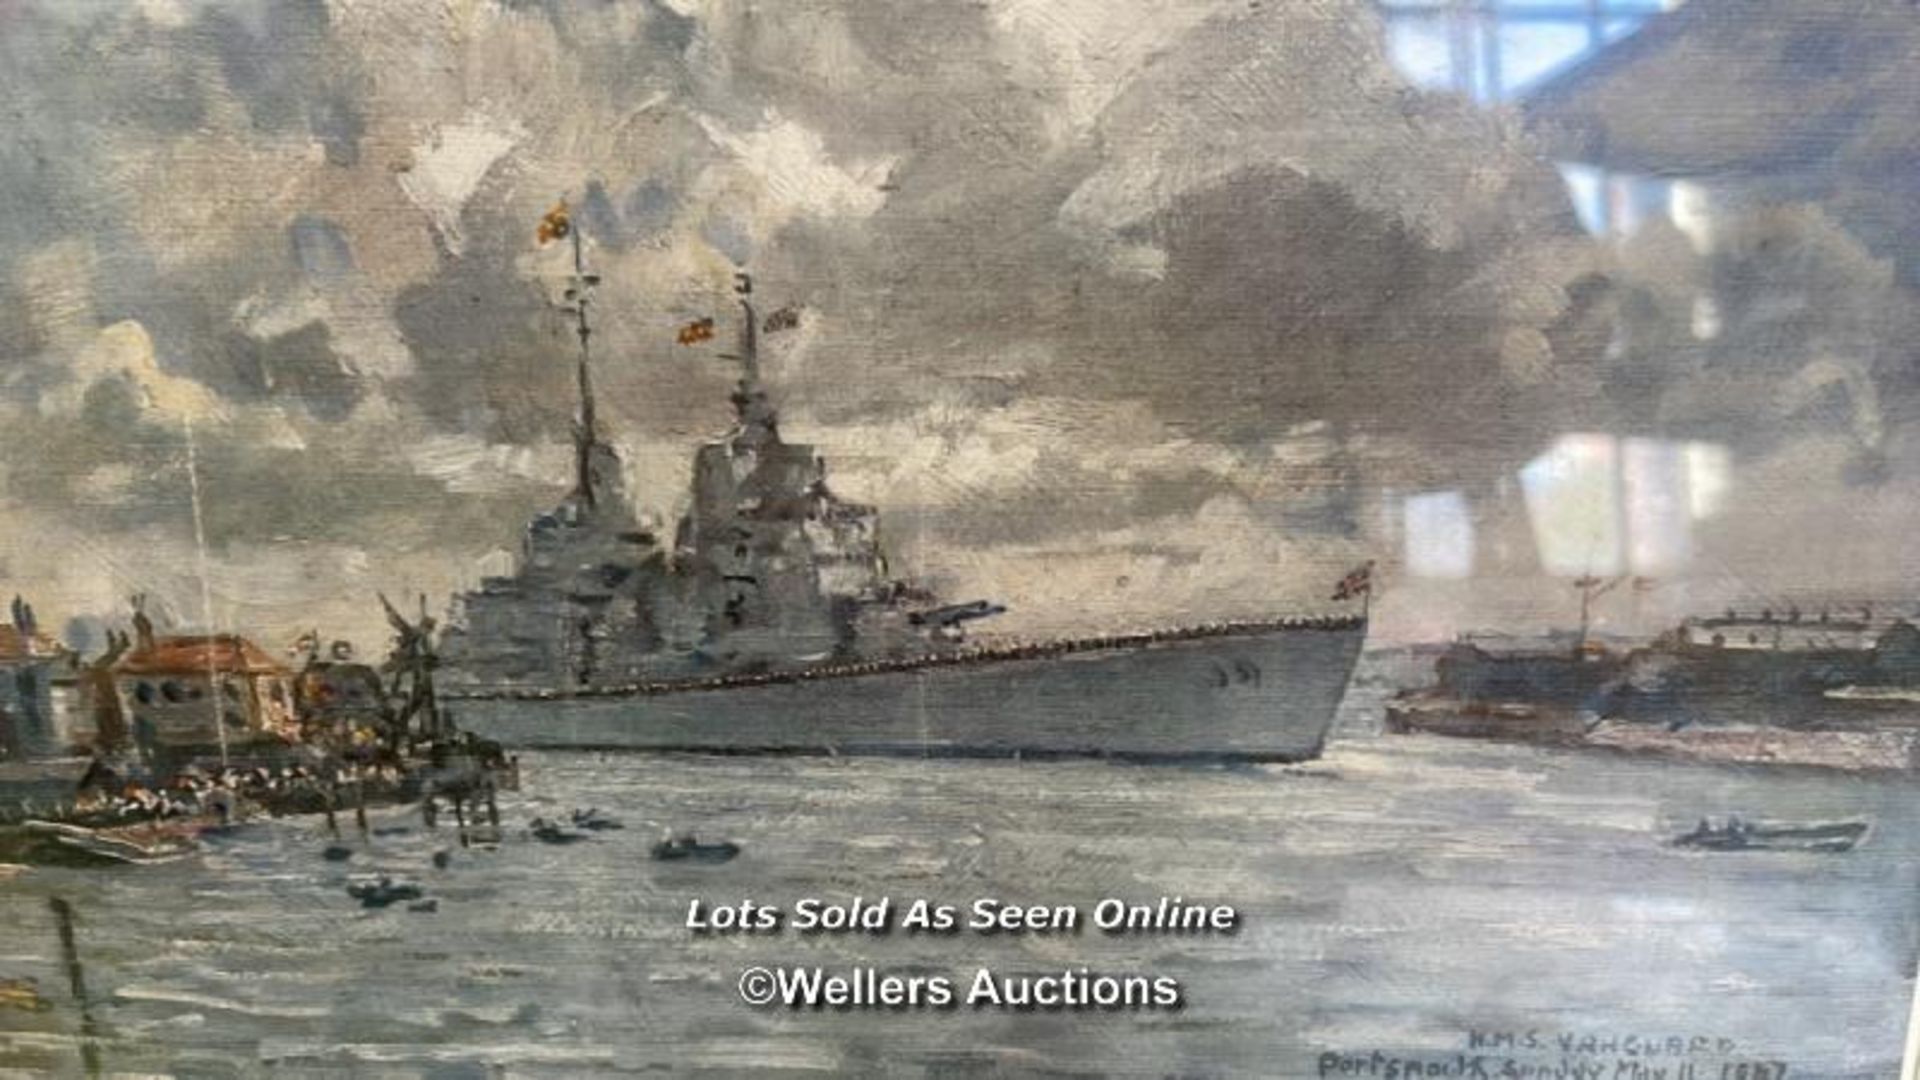 H.M.S. VANGUARD - FRAMED PRINT 'HOME AGAIN' WITH HAND WRITTEN DEDICATION DATED 1947 43.5 X 31.5CM - Image 2 of 6